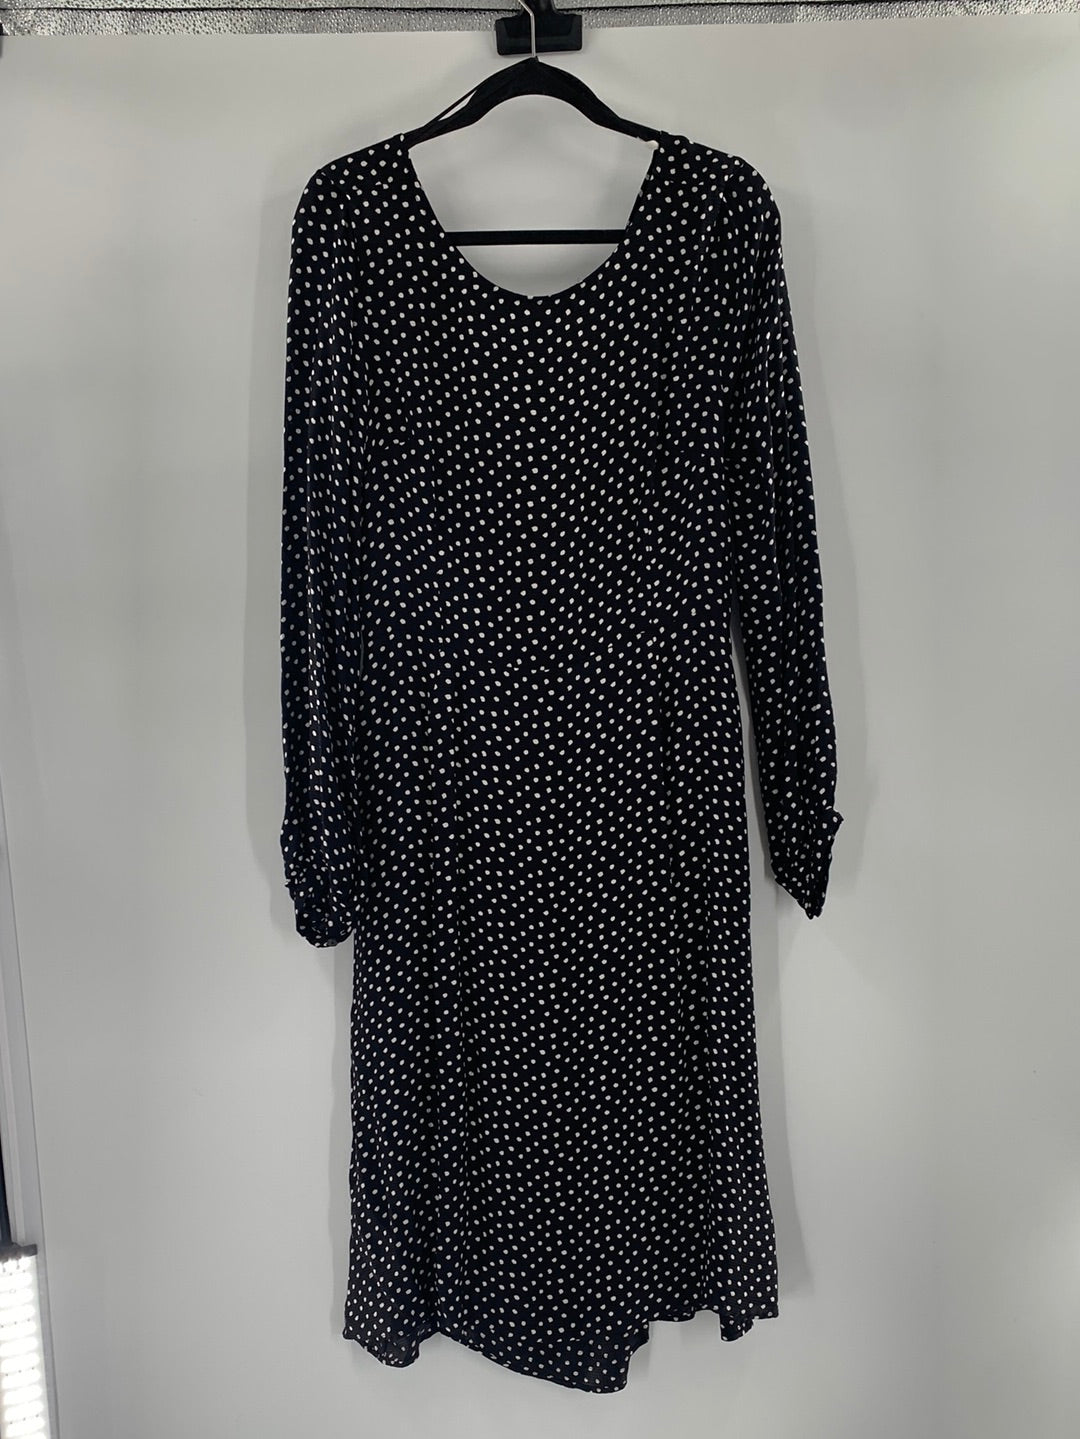 Anthropologie Black Satin With White Polka Dots Long Sleeve Back Open Maxi Dress (Size 12)